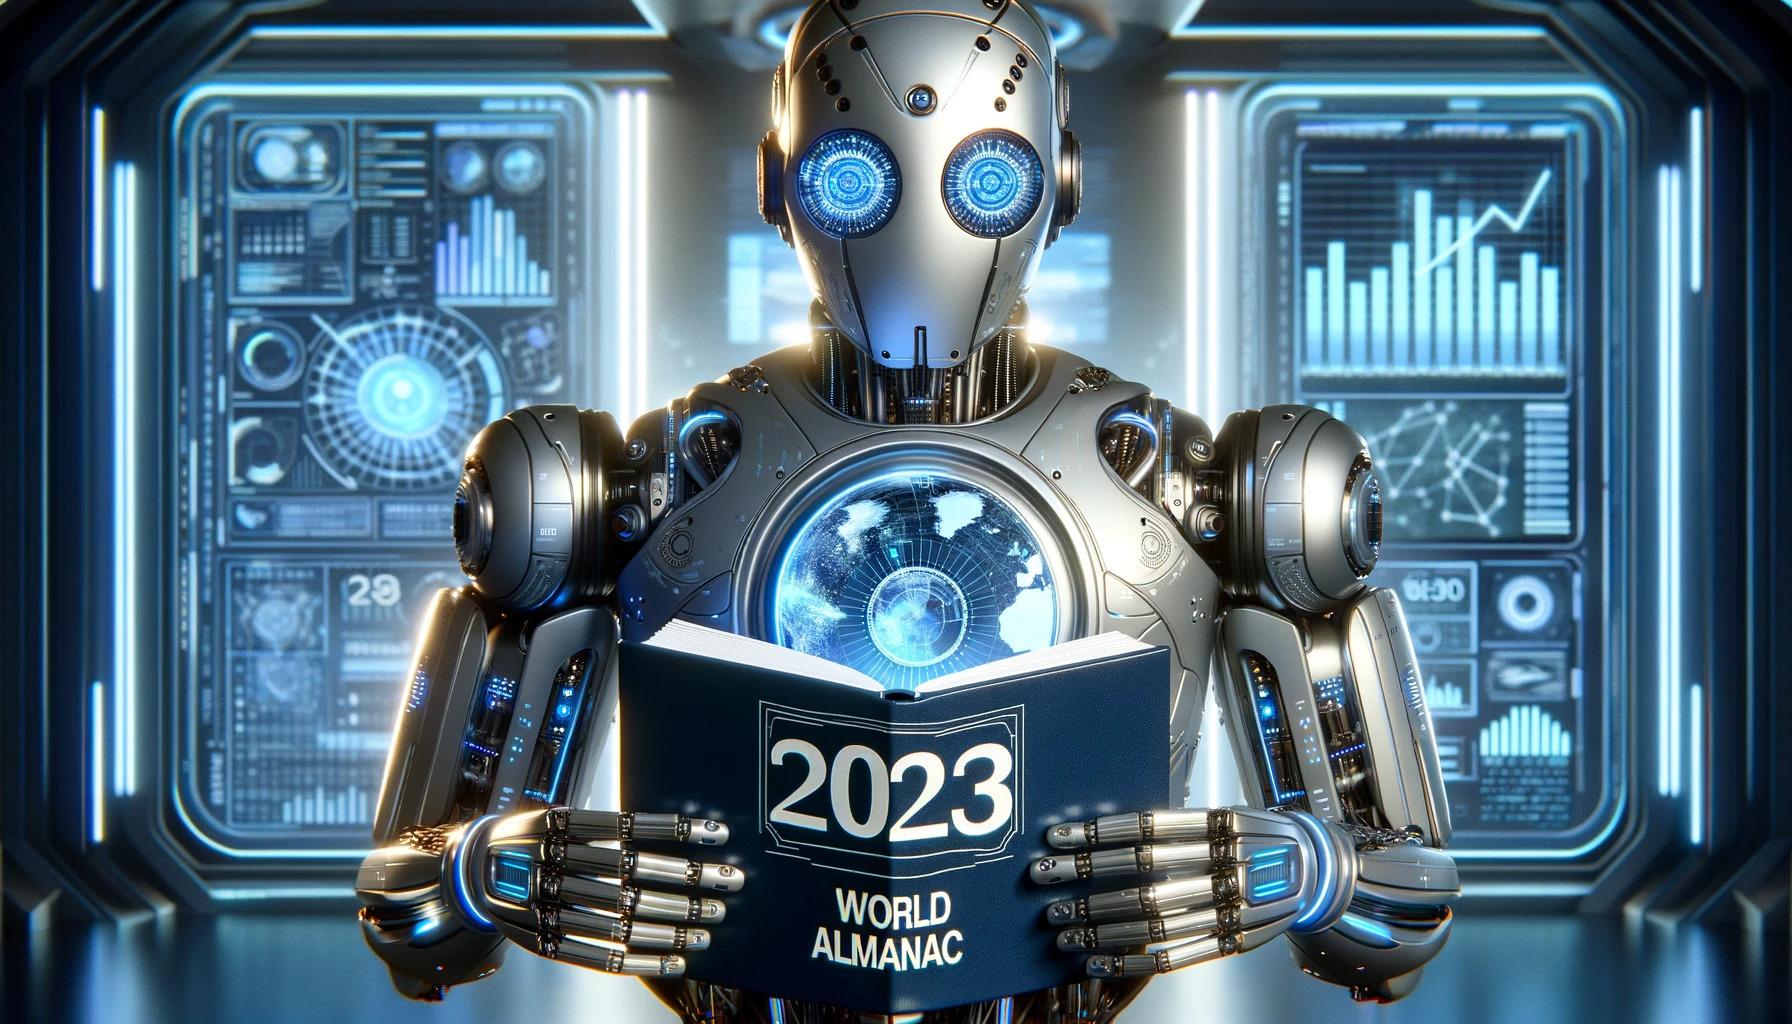 A futuristic AI robot holding the 2023 World Almanac with pride. The robot is designed with a sleek, modern appearance, featuring a metallic sheen with hints of blue and white LED lights accenting its joints and panels. On the robot's chest, there is an emblem with the word 'Turbo' written in a bold, futuristic font. The background shows a tech-inspired interior, with digital screens and holograms depicting various data charts, symbolizing the wealth of knowledge contained within the almanac. The aspect ratio of the image is 16:9.